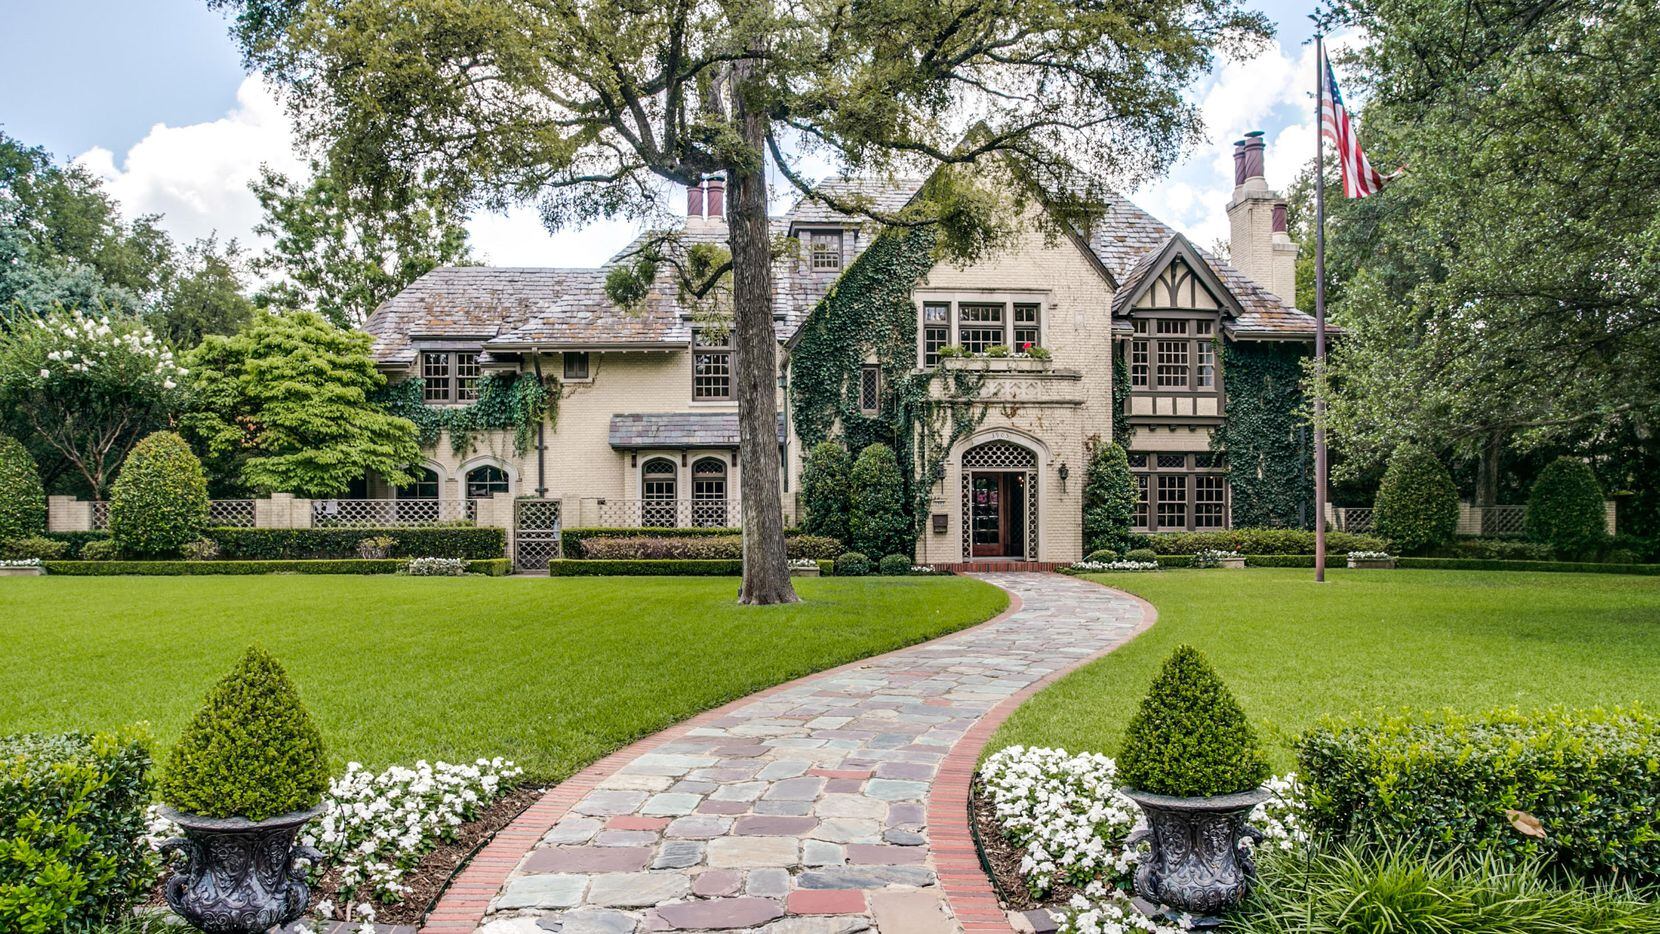 The Wyly house on Beverly Drive was listed for sale for $12.5 million.